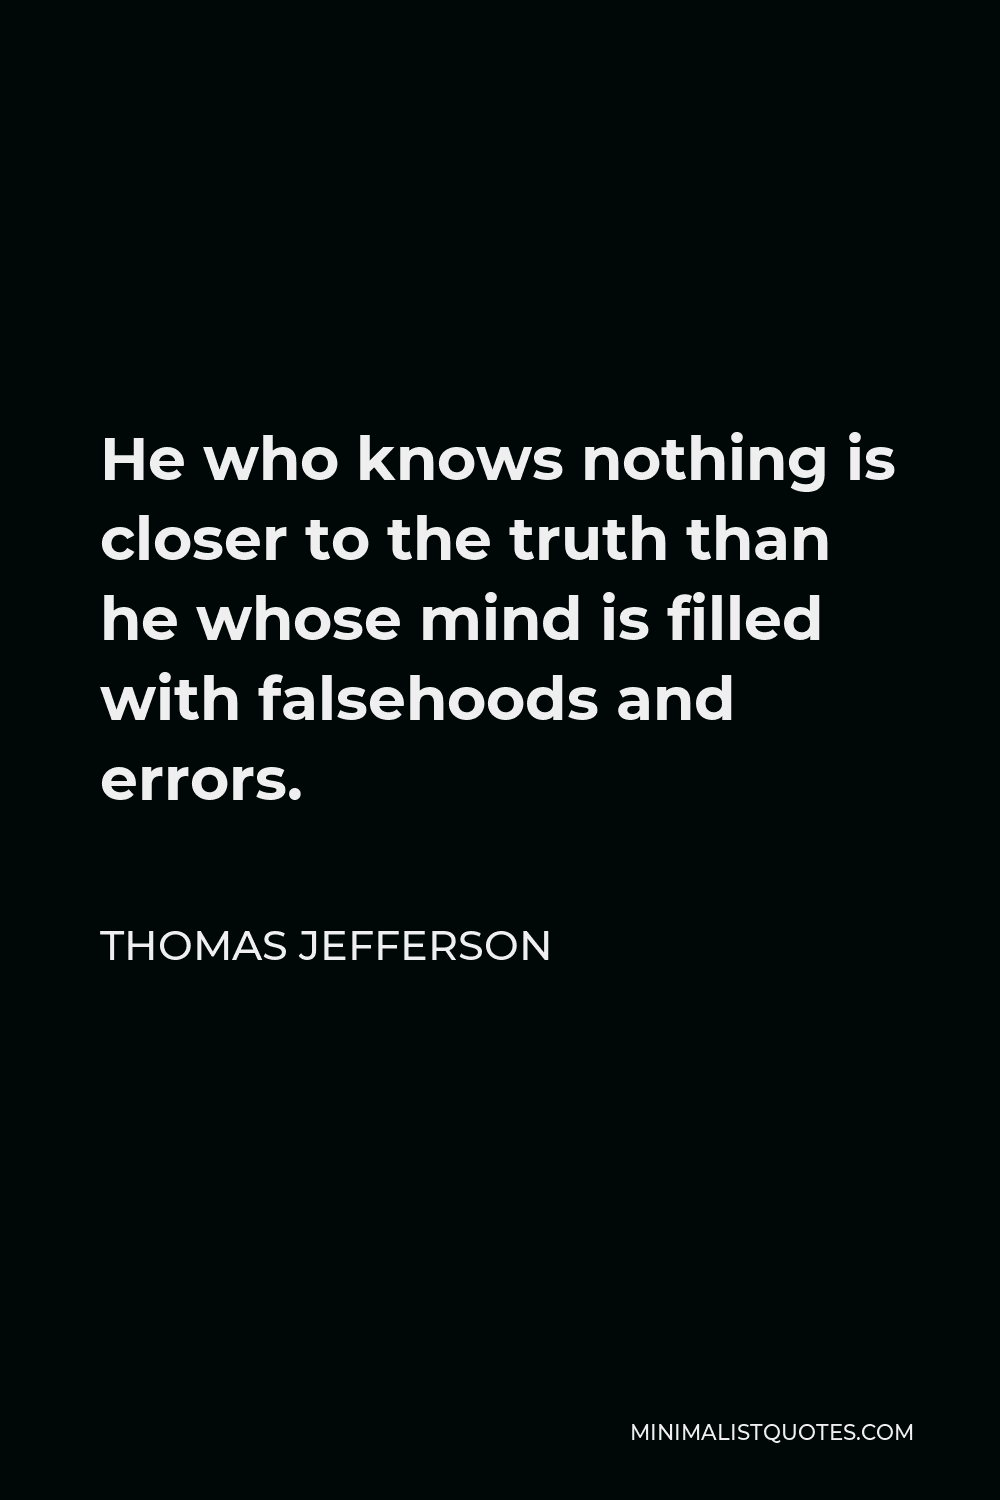 Thomas Jefferson Quote - He who knows nothing is closer to the truth than he whose mind is filled with falsehoods and errors.